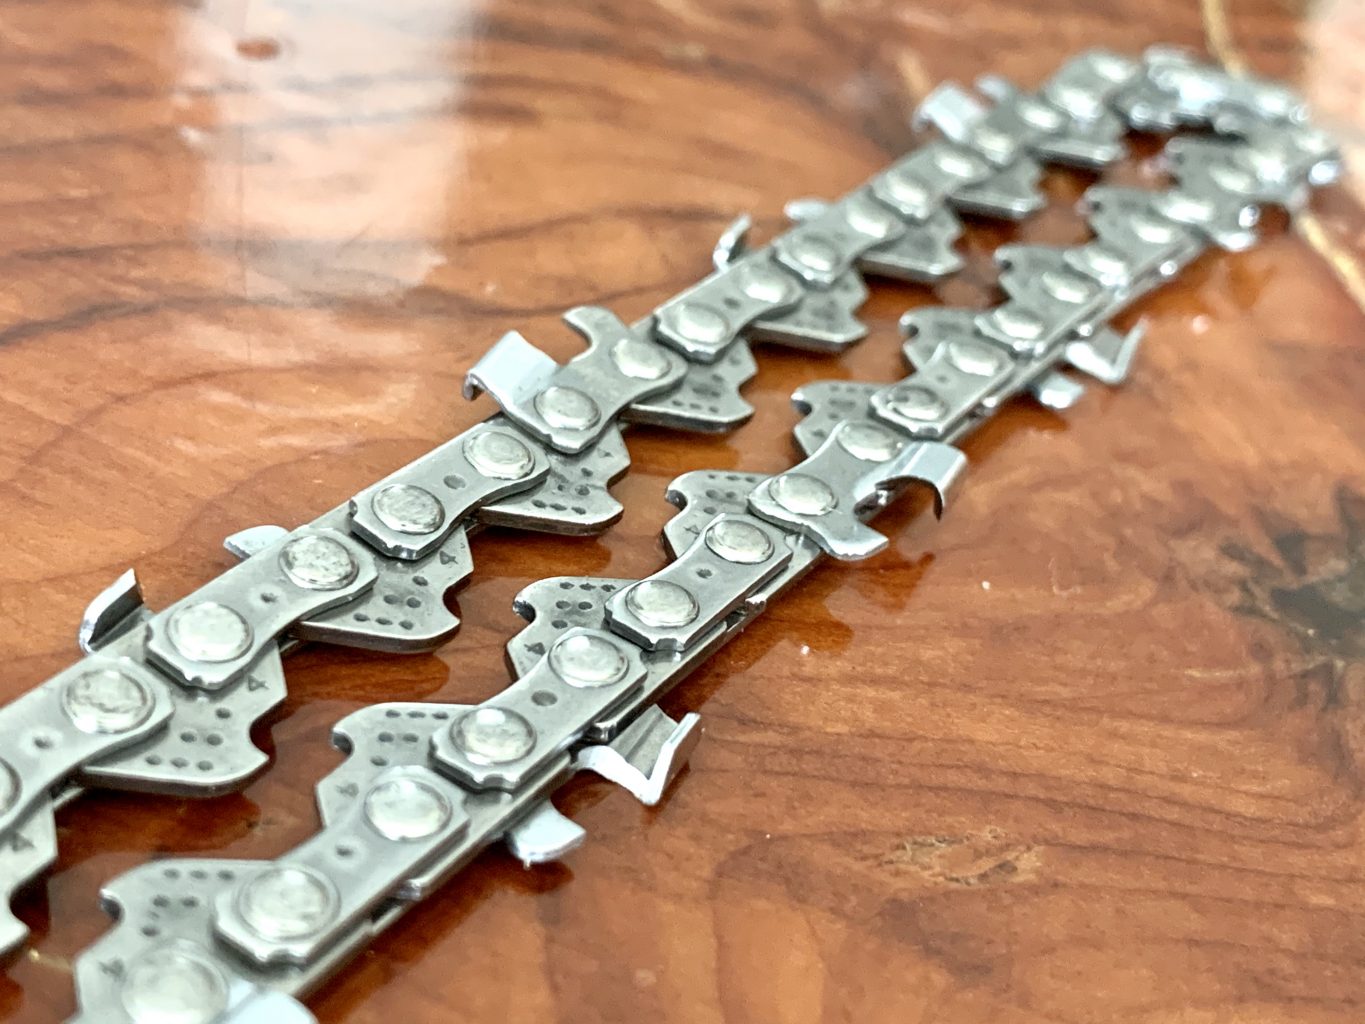 PMC Panther Mini Chain 1/4 .043 80 Drive Link Chain for 16"[40cm] Panther Mini Bars